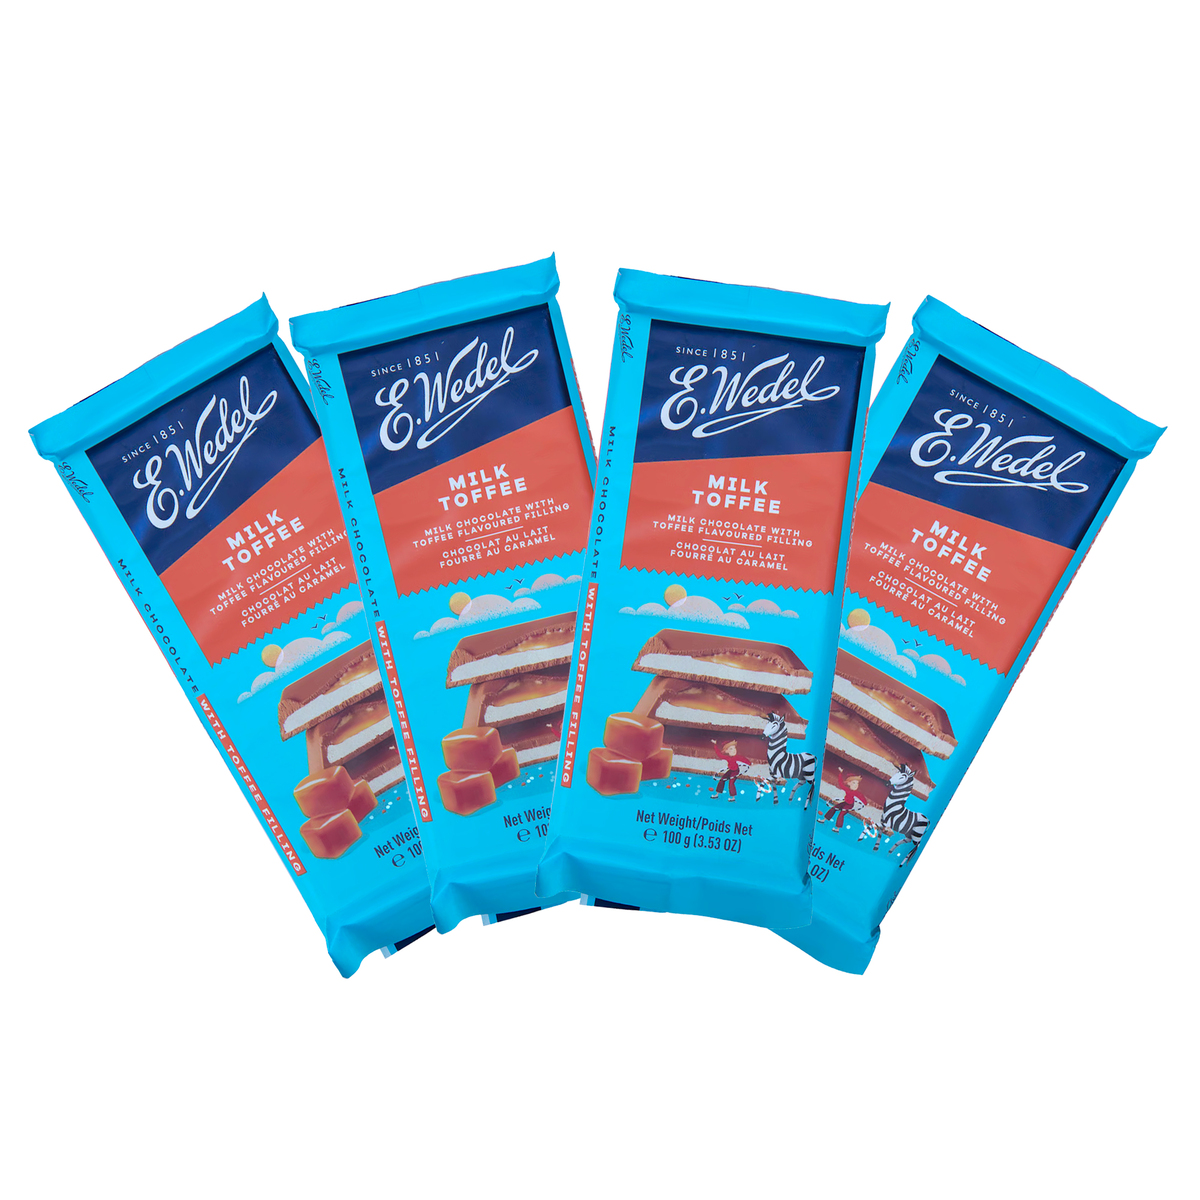 E Wedel Milk Chocolate With Toffee Filling 4 x 100 g